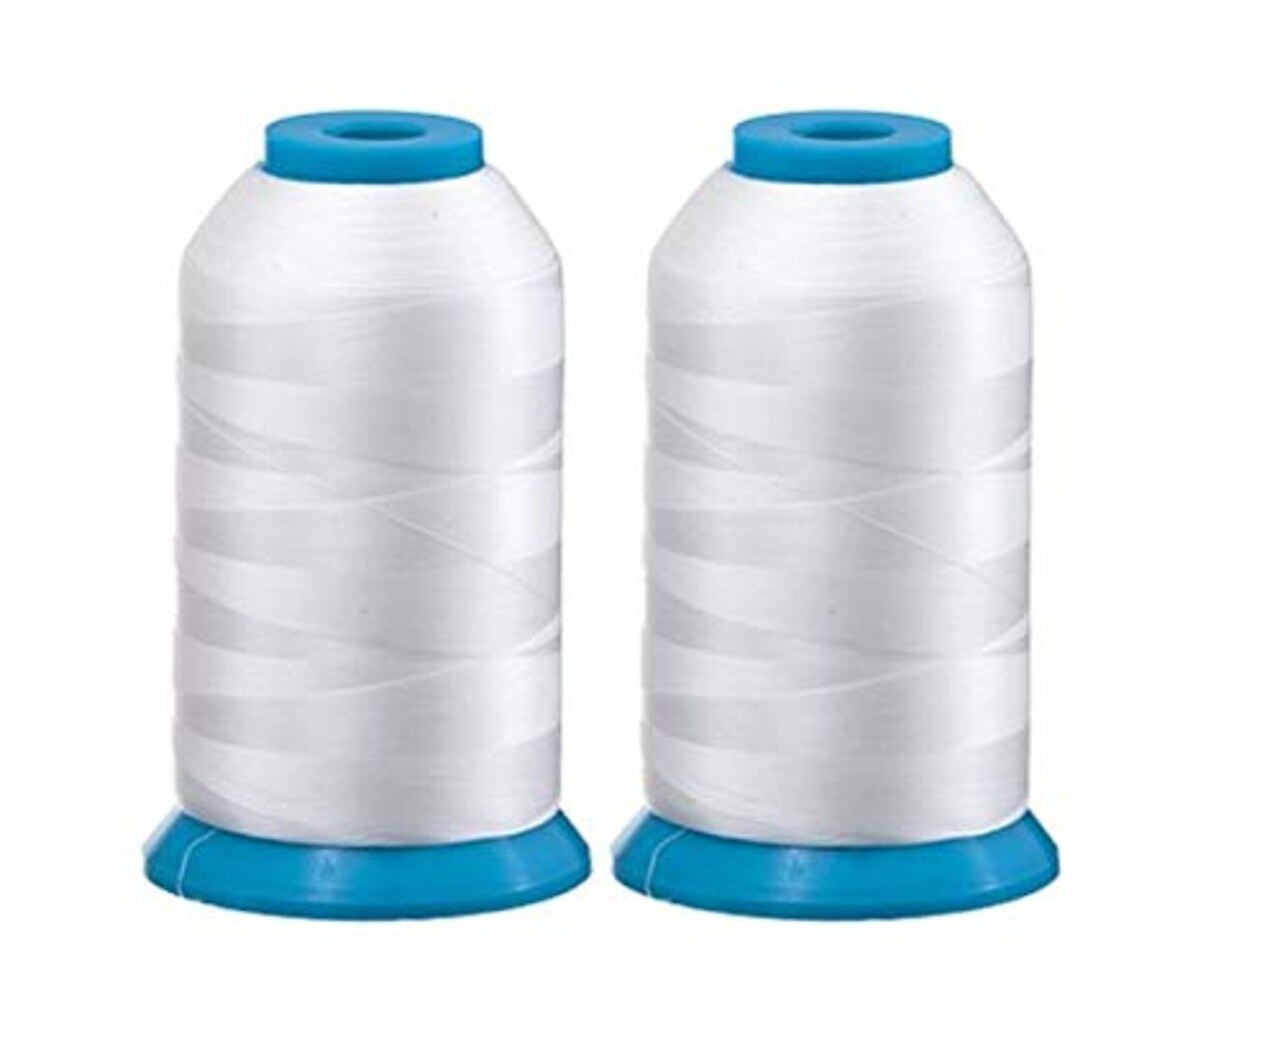 Set of 2 Huge White Spools Bobbin Thread for Embroidery Machine and Sewing  Machine - 60 Weight - 5500 Yards Each - Polyester -Embroidex